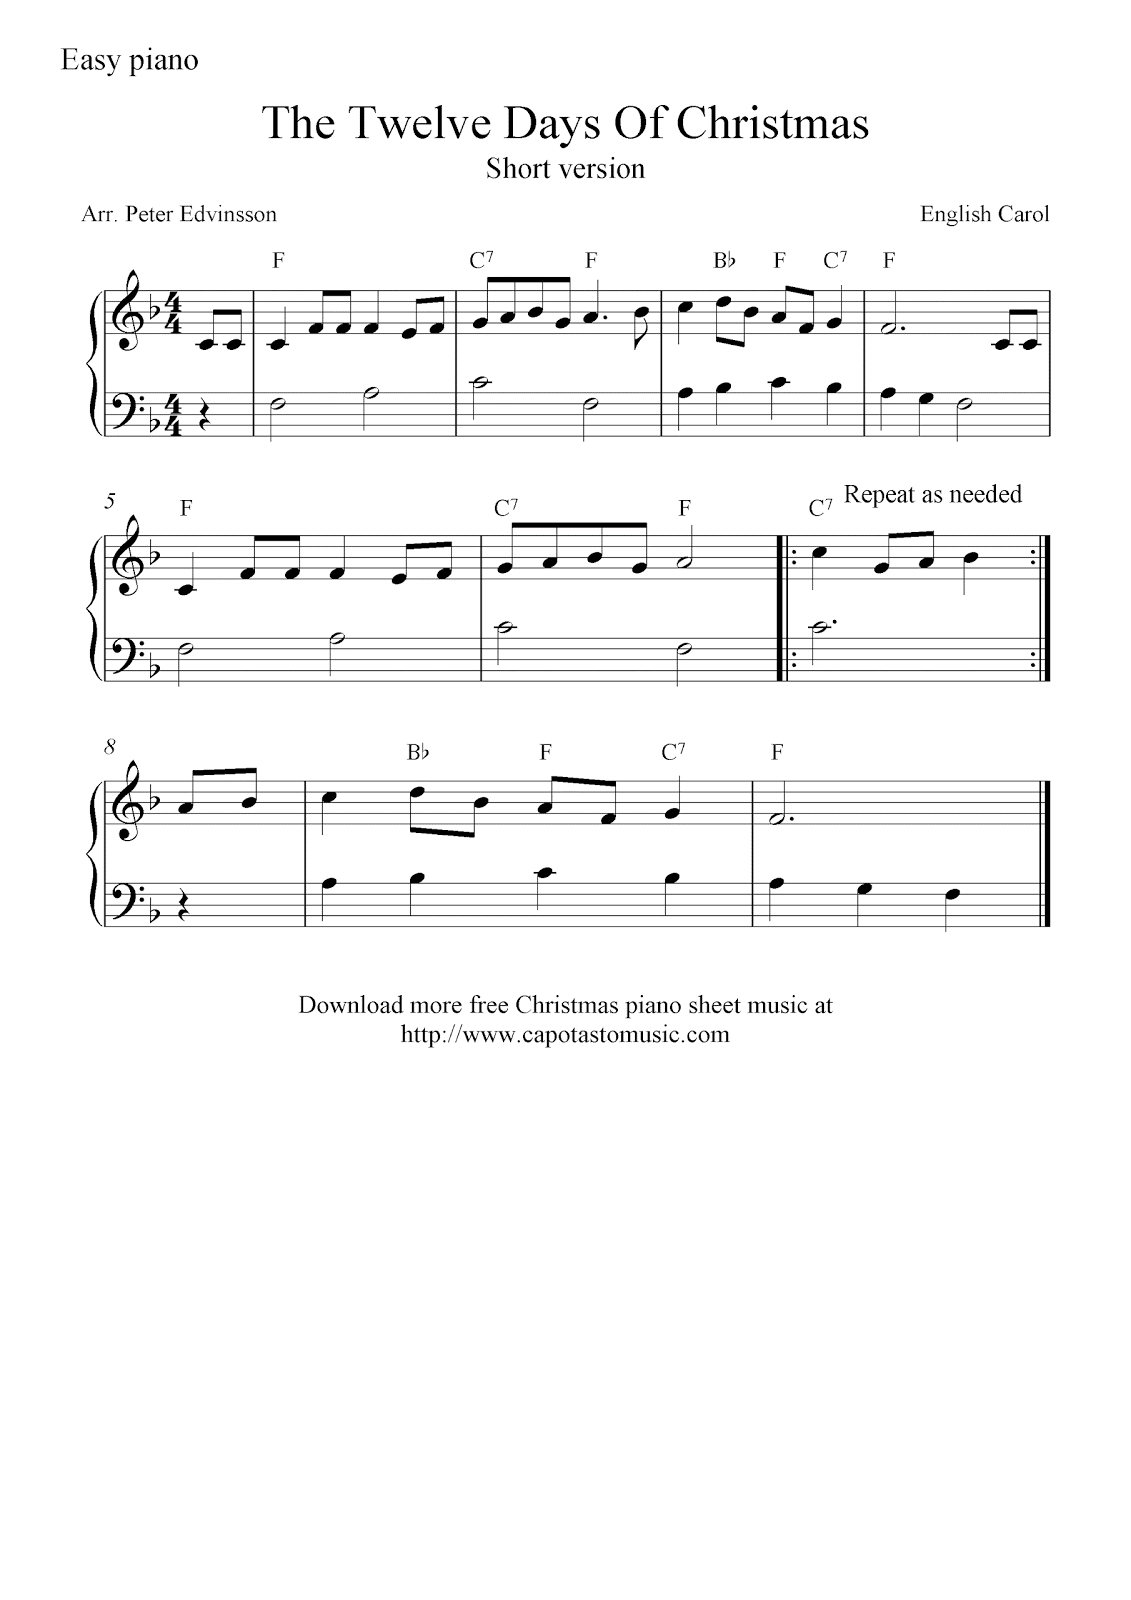 Free Christmas Piano Sheet Music Notes, The Twelve Days Of Christmas - Free Christmas Piano Sheet Music For Beginners Printable